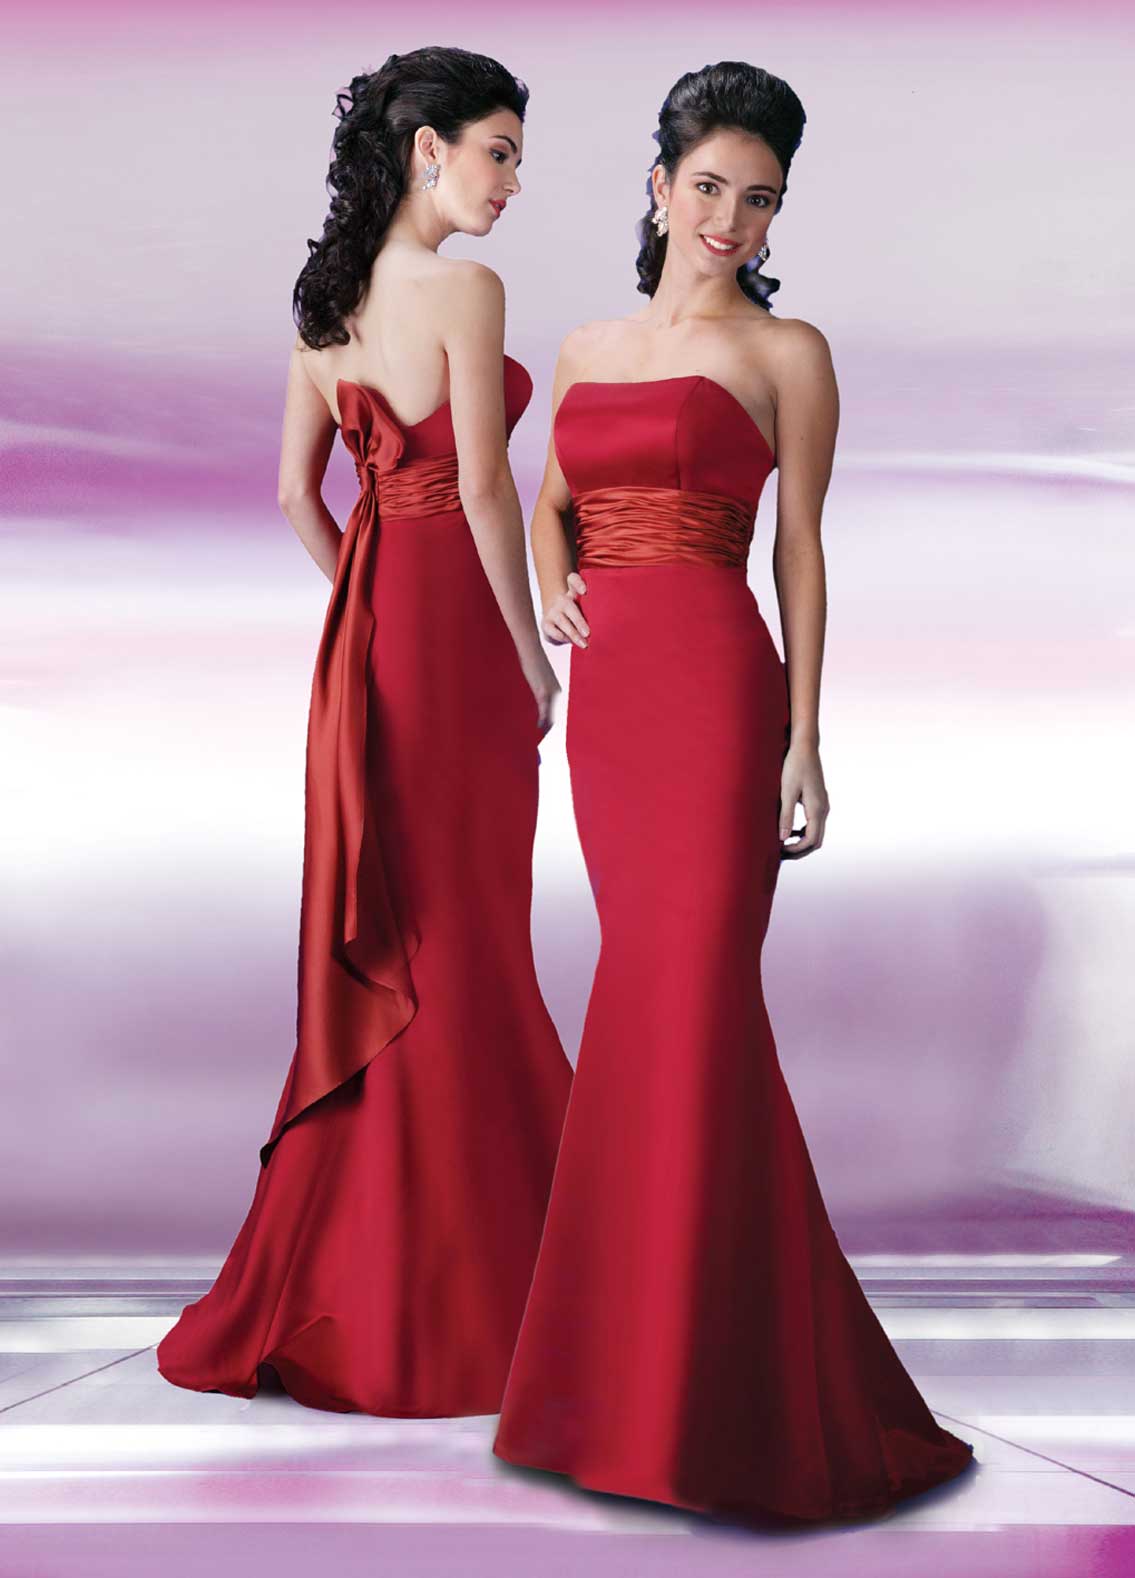 Bridal Dresses In Red & Fashion Show Collection